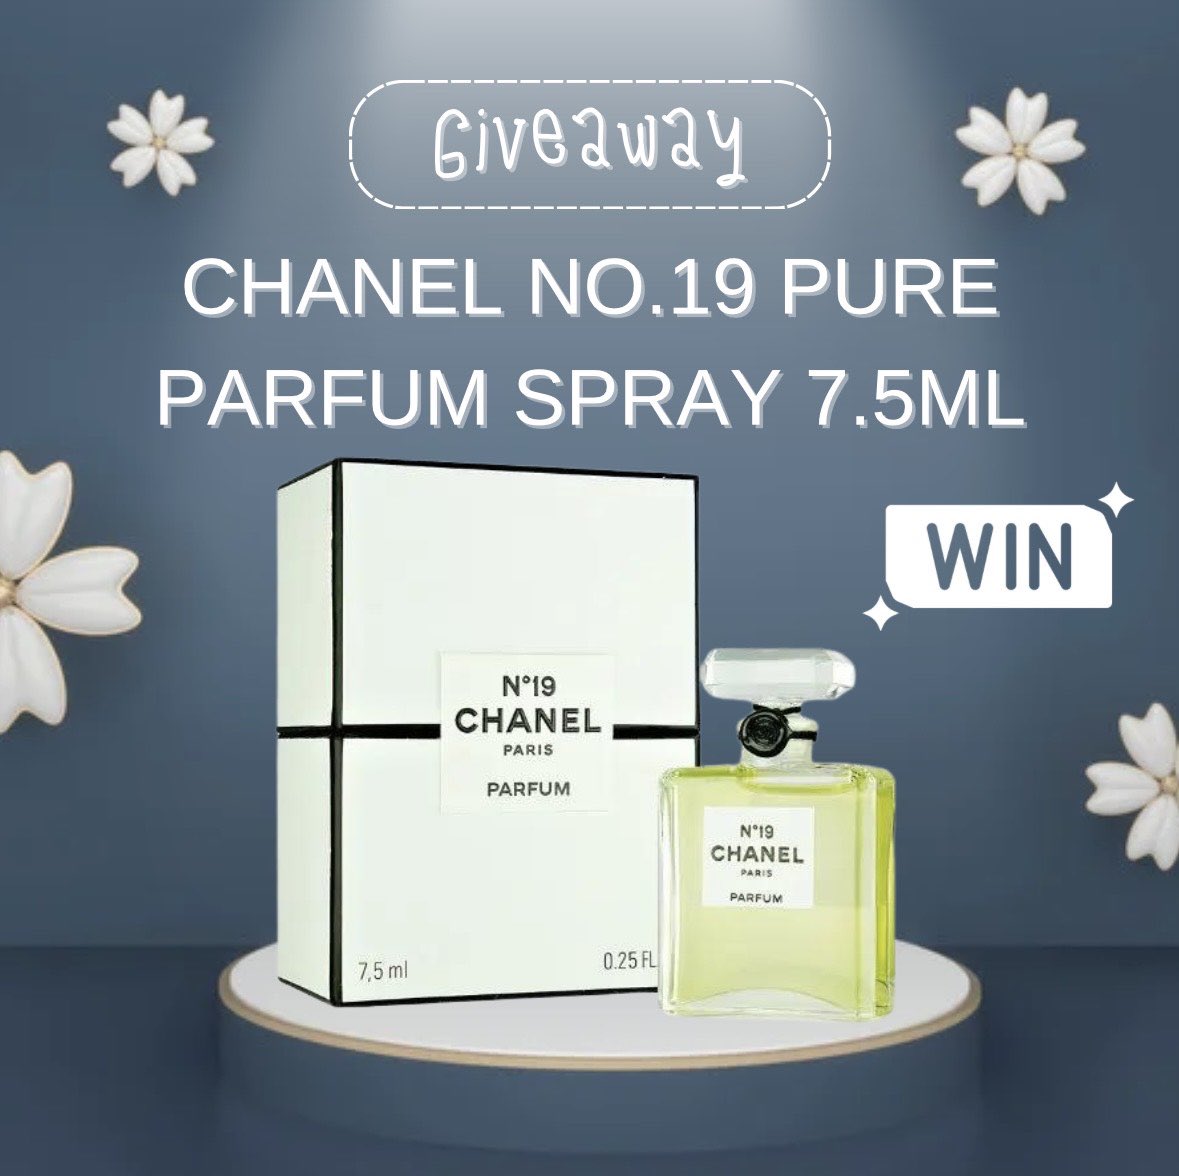 🎉Giveaway Time🎉 Win yourself CHANEL NO.19 PURE PARFUM SPRAY 7.5ML 1️⃣ Like & share this post  2️⃣ Tag your bestie 3️⃣ Make sure you are following @thebeautystorecom 🎉 Competition ends Sunday 31st March 6pm! Good Luck!  thebeautystore.com #competition #competitiontime #win